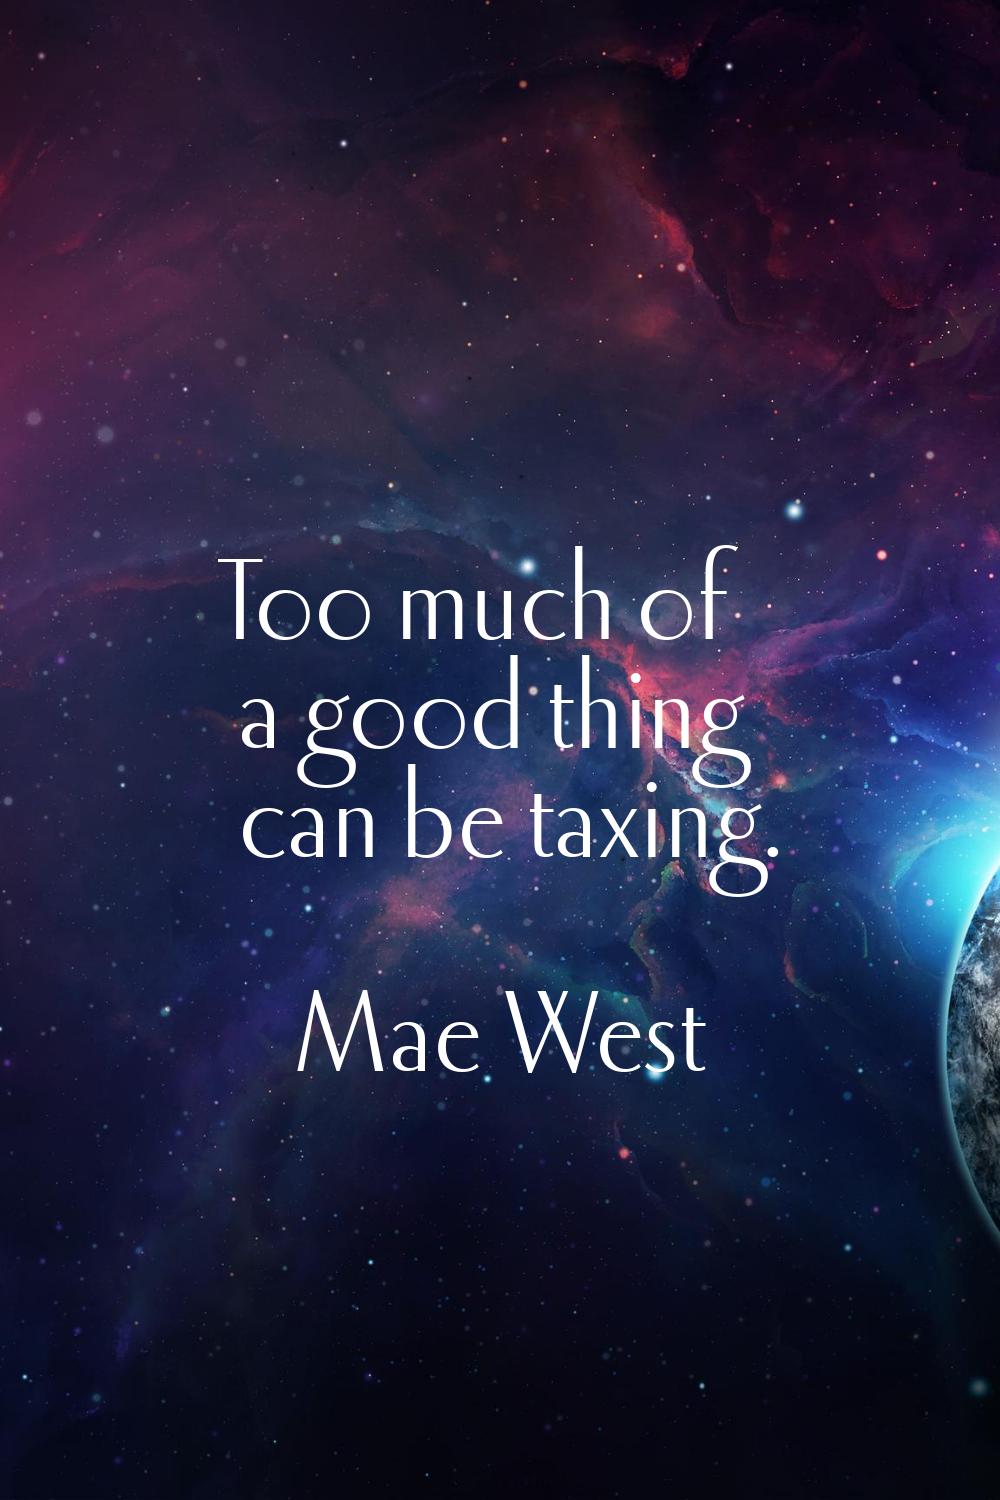 Too much of a good thing can be taxing.